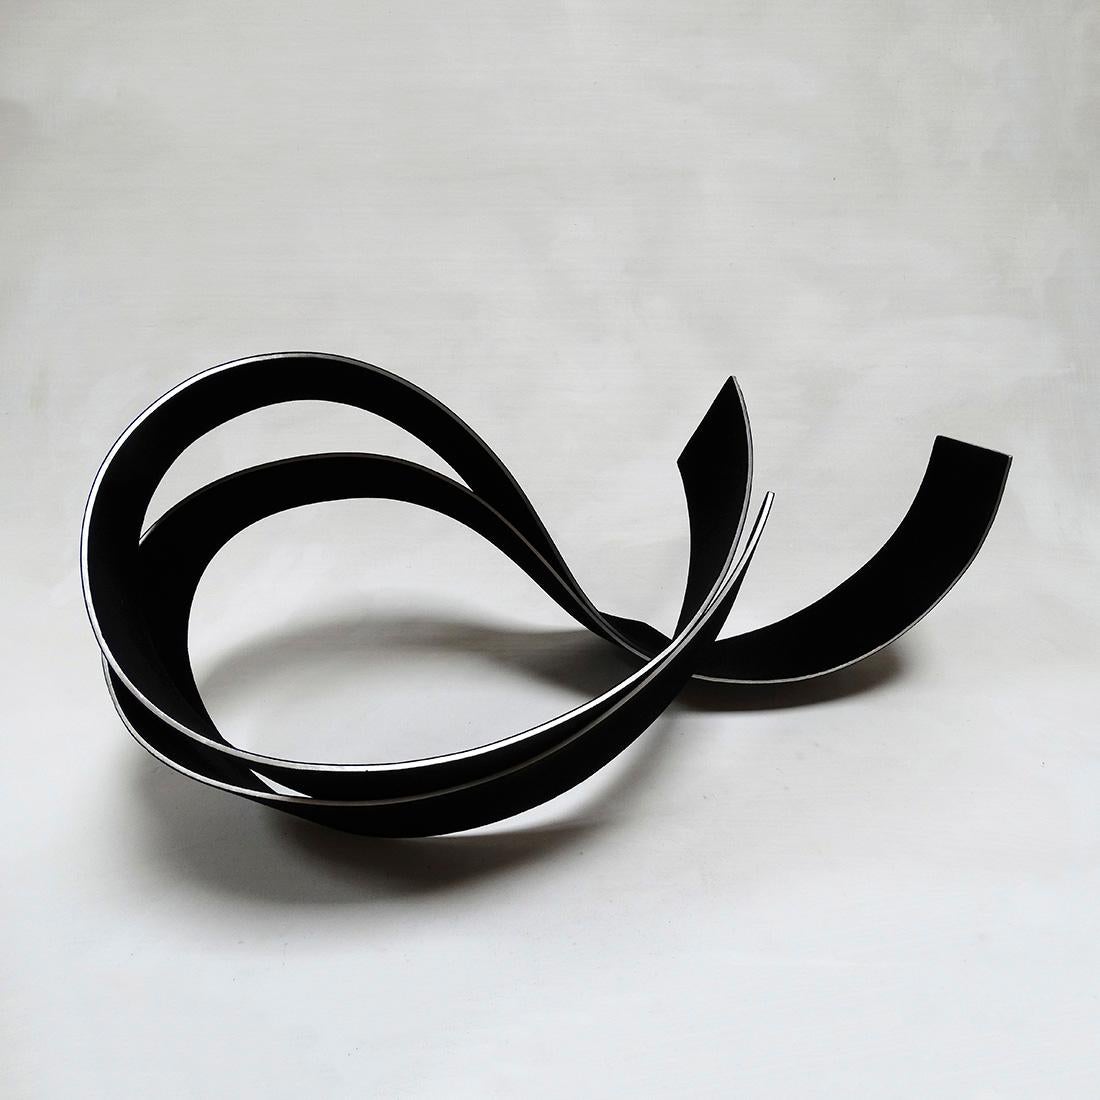 Inspired by art history, music, poetry and great artists such as Alexander Calder, Rafael Amorós is a Spanish artist who creates abstract one-of-a-kind sculptures entirely by hand at his artisanal workshop in Valencia. His works are an ode to design